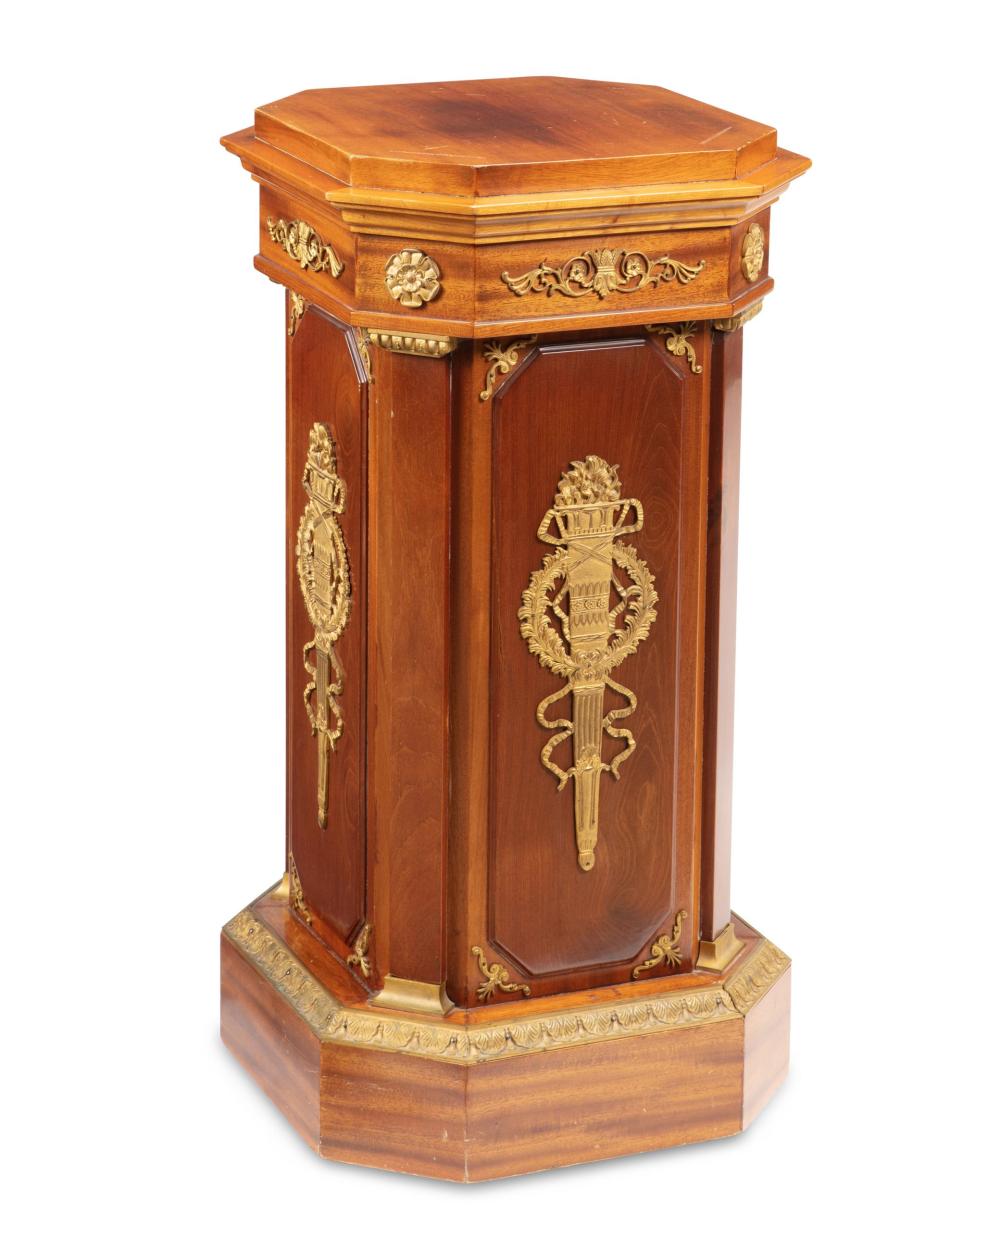 A FRENCH NEOCLASSICAL-STYLE PEDESTAL